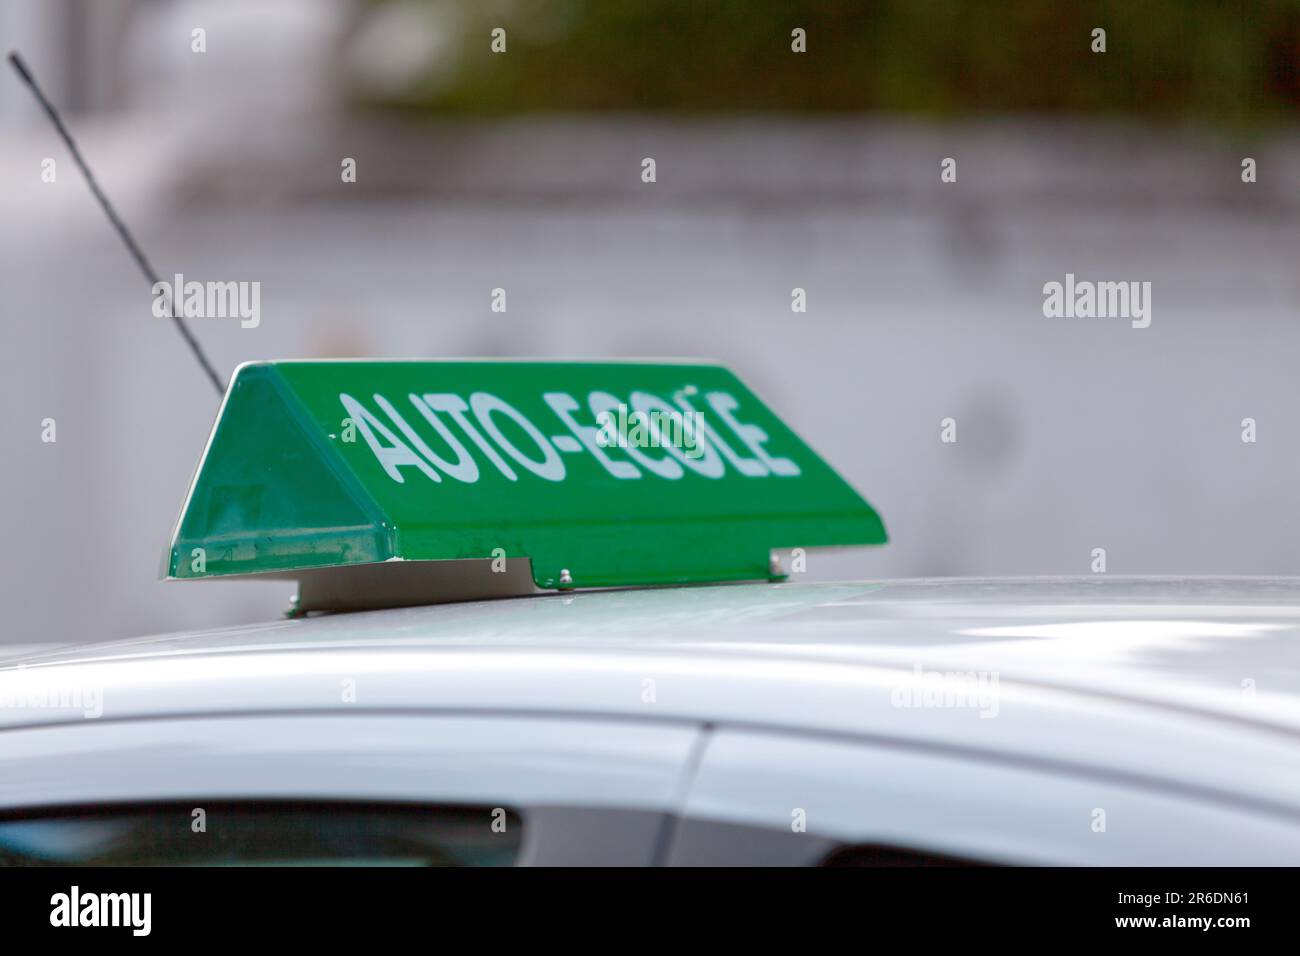 Green car roof sign saying in French 'Auto-Ecole', meaning in English 'Driving school'. Stock Photo